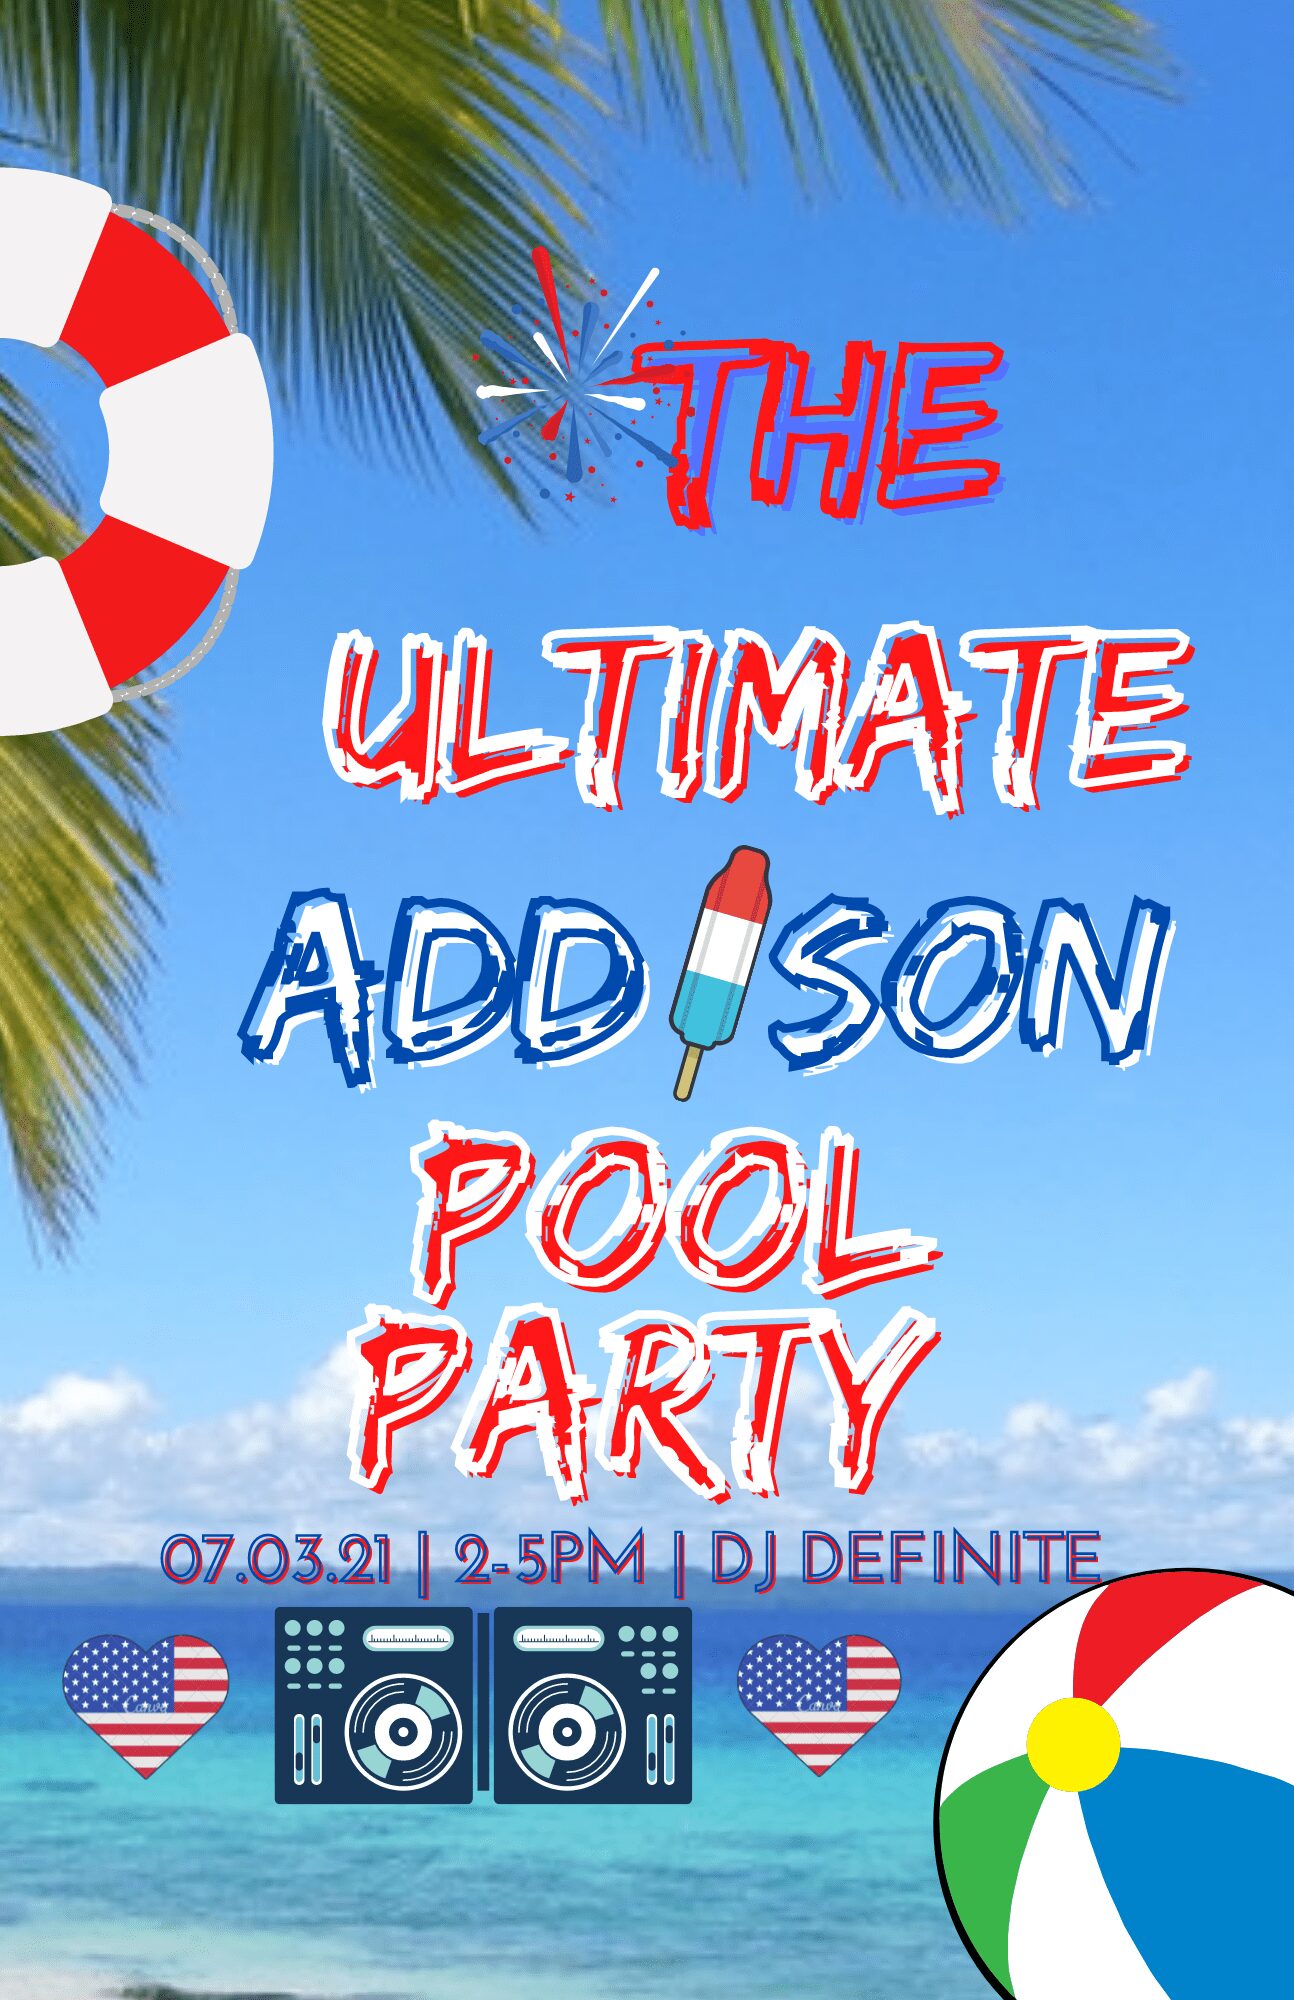 Flyer for the Ultimate Addison Pool Party July 3rd 2021 2-5pm DJ Definite